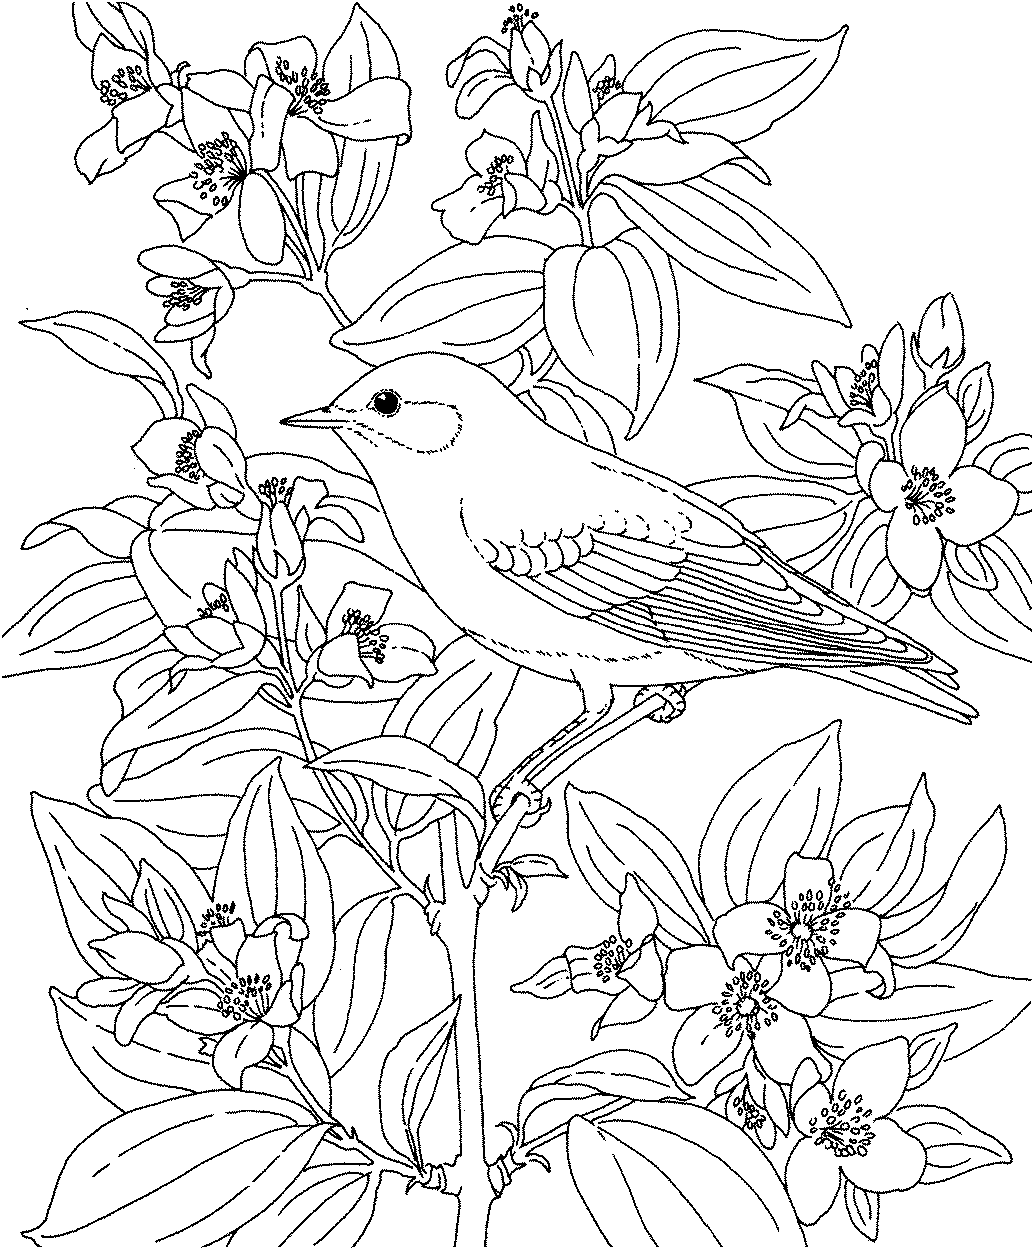 Birds And Flowers Coloring Pages.